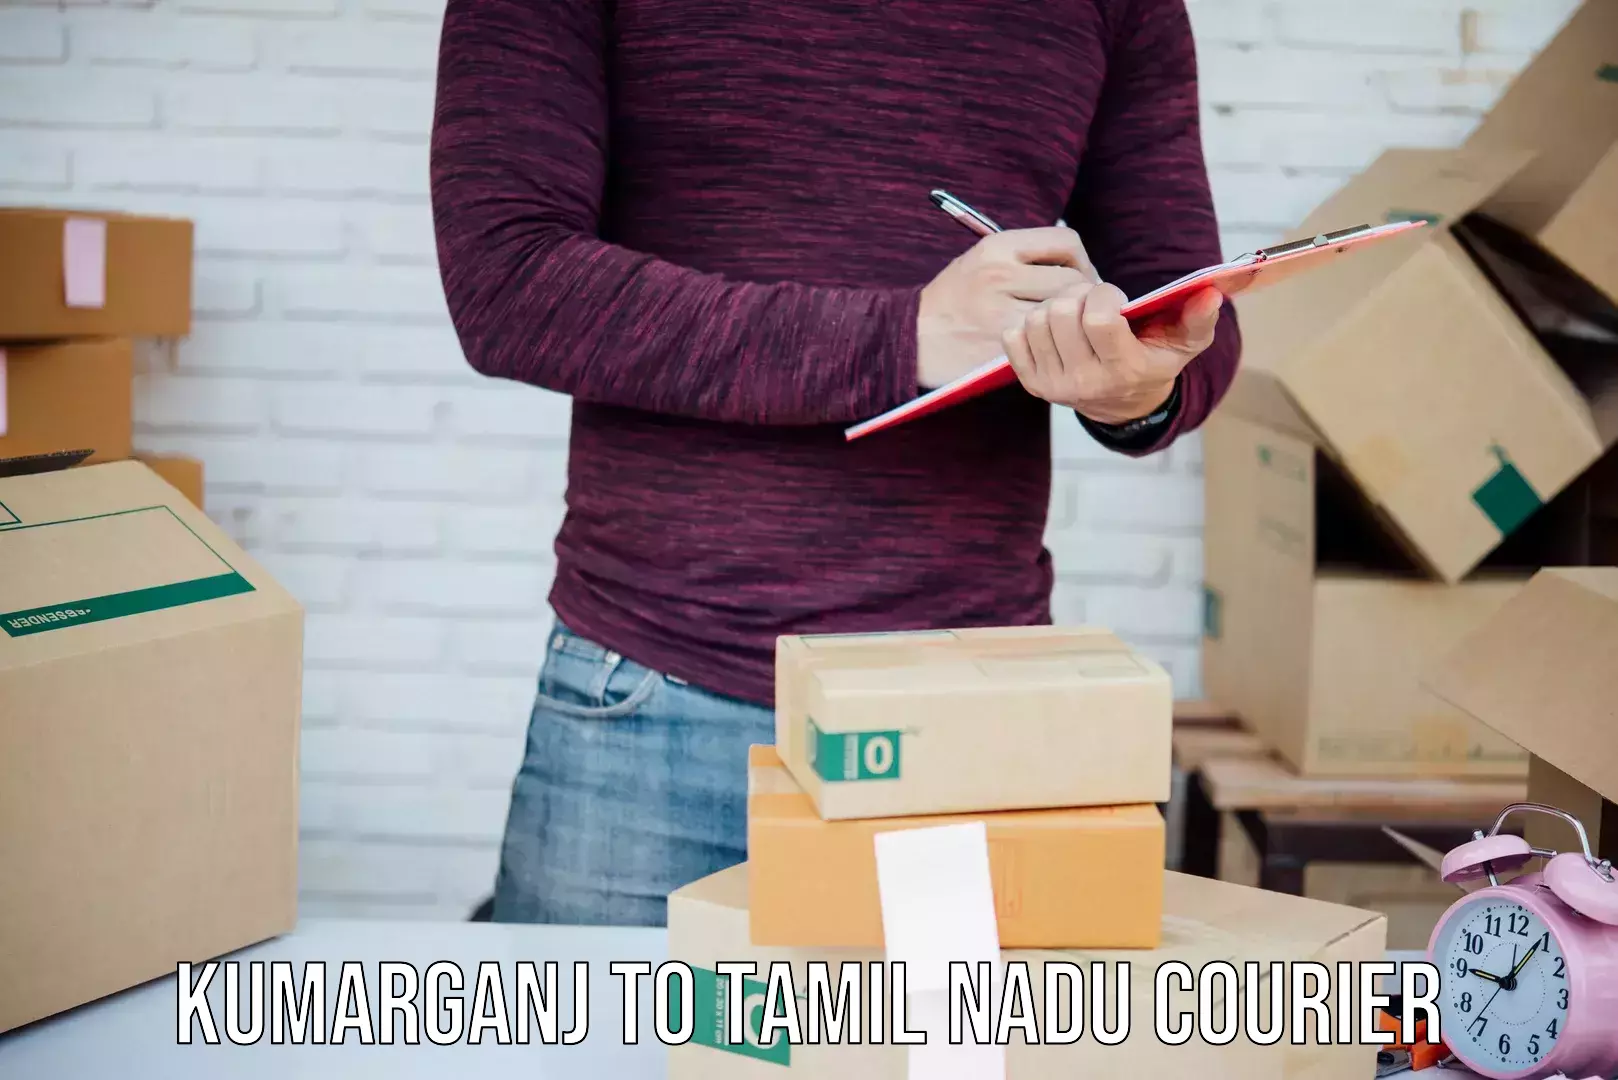 State-of-the-art courier technology Kumarganj to Tamil Nadu